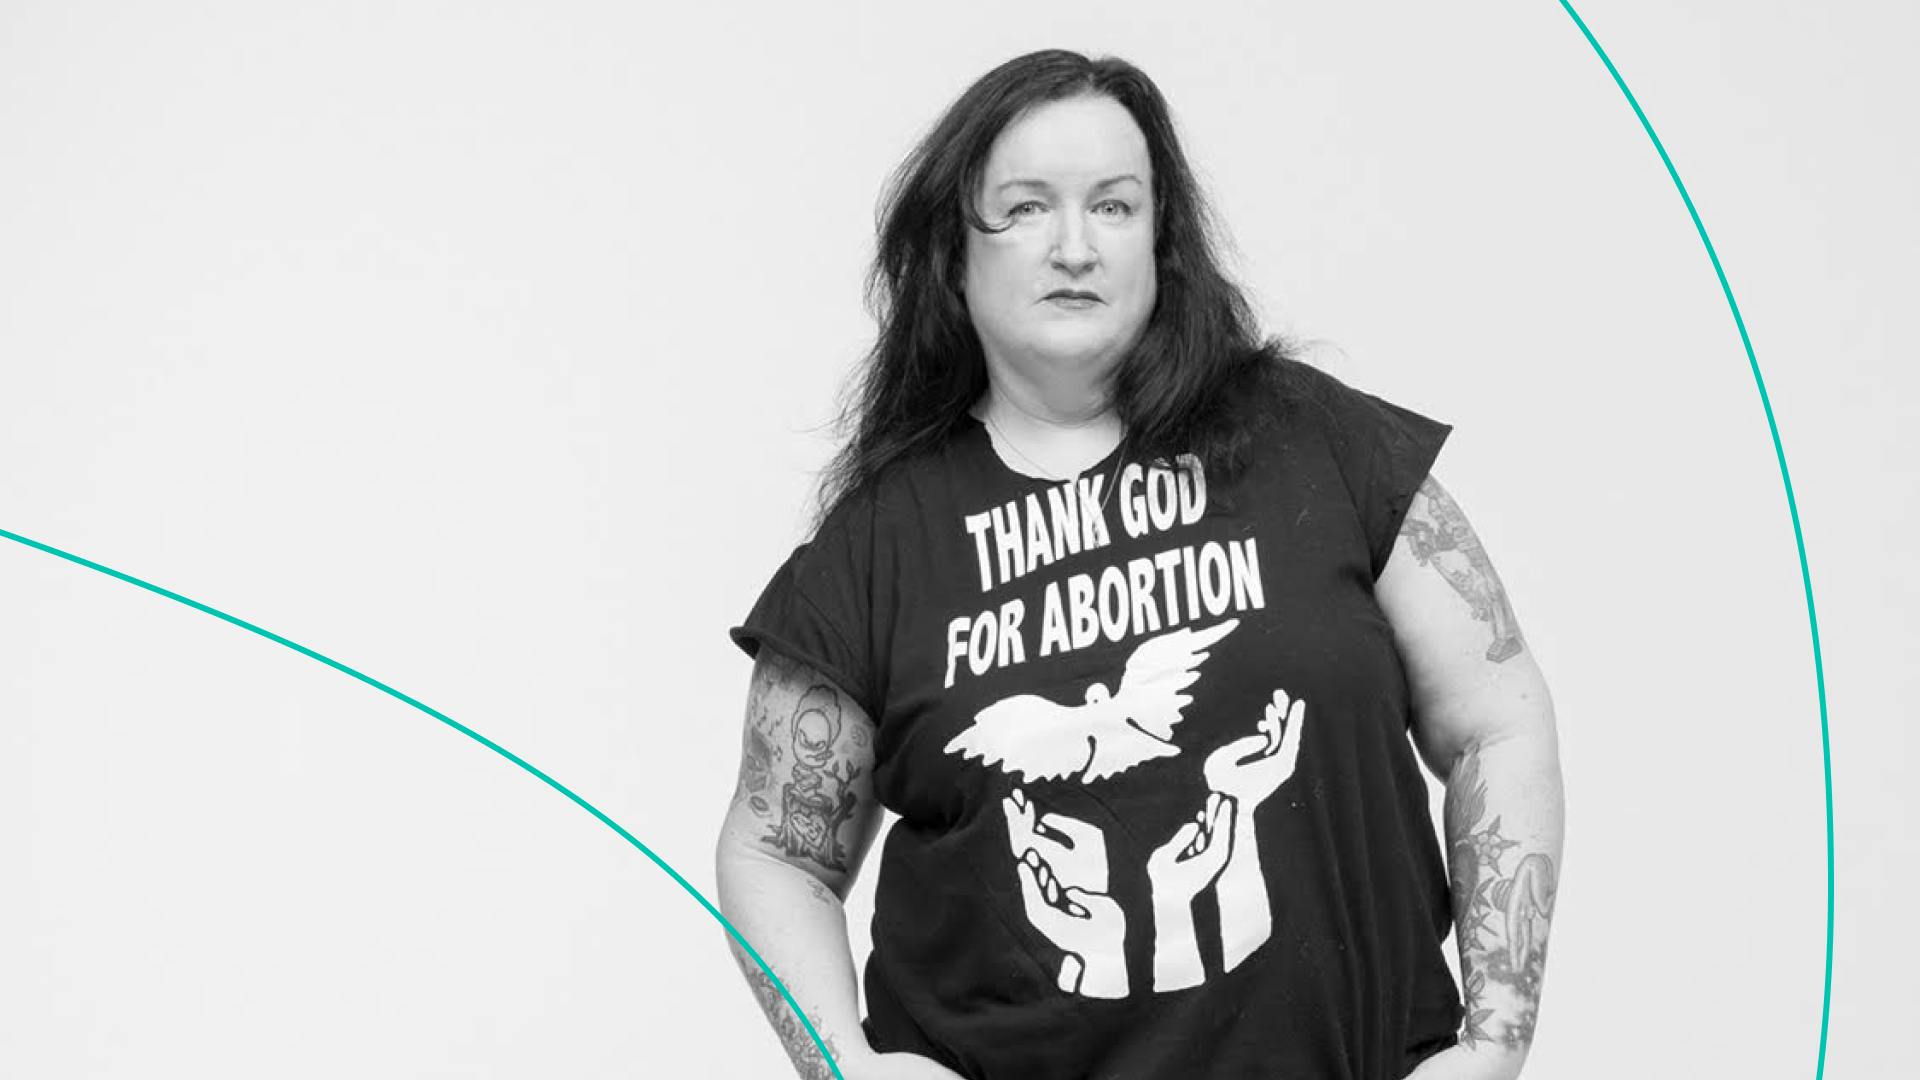 Lisa Hamilton works as an abortion doula in New York